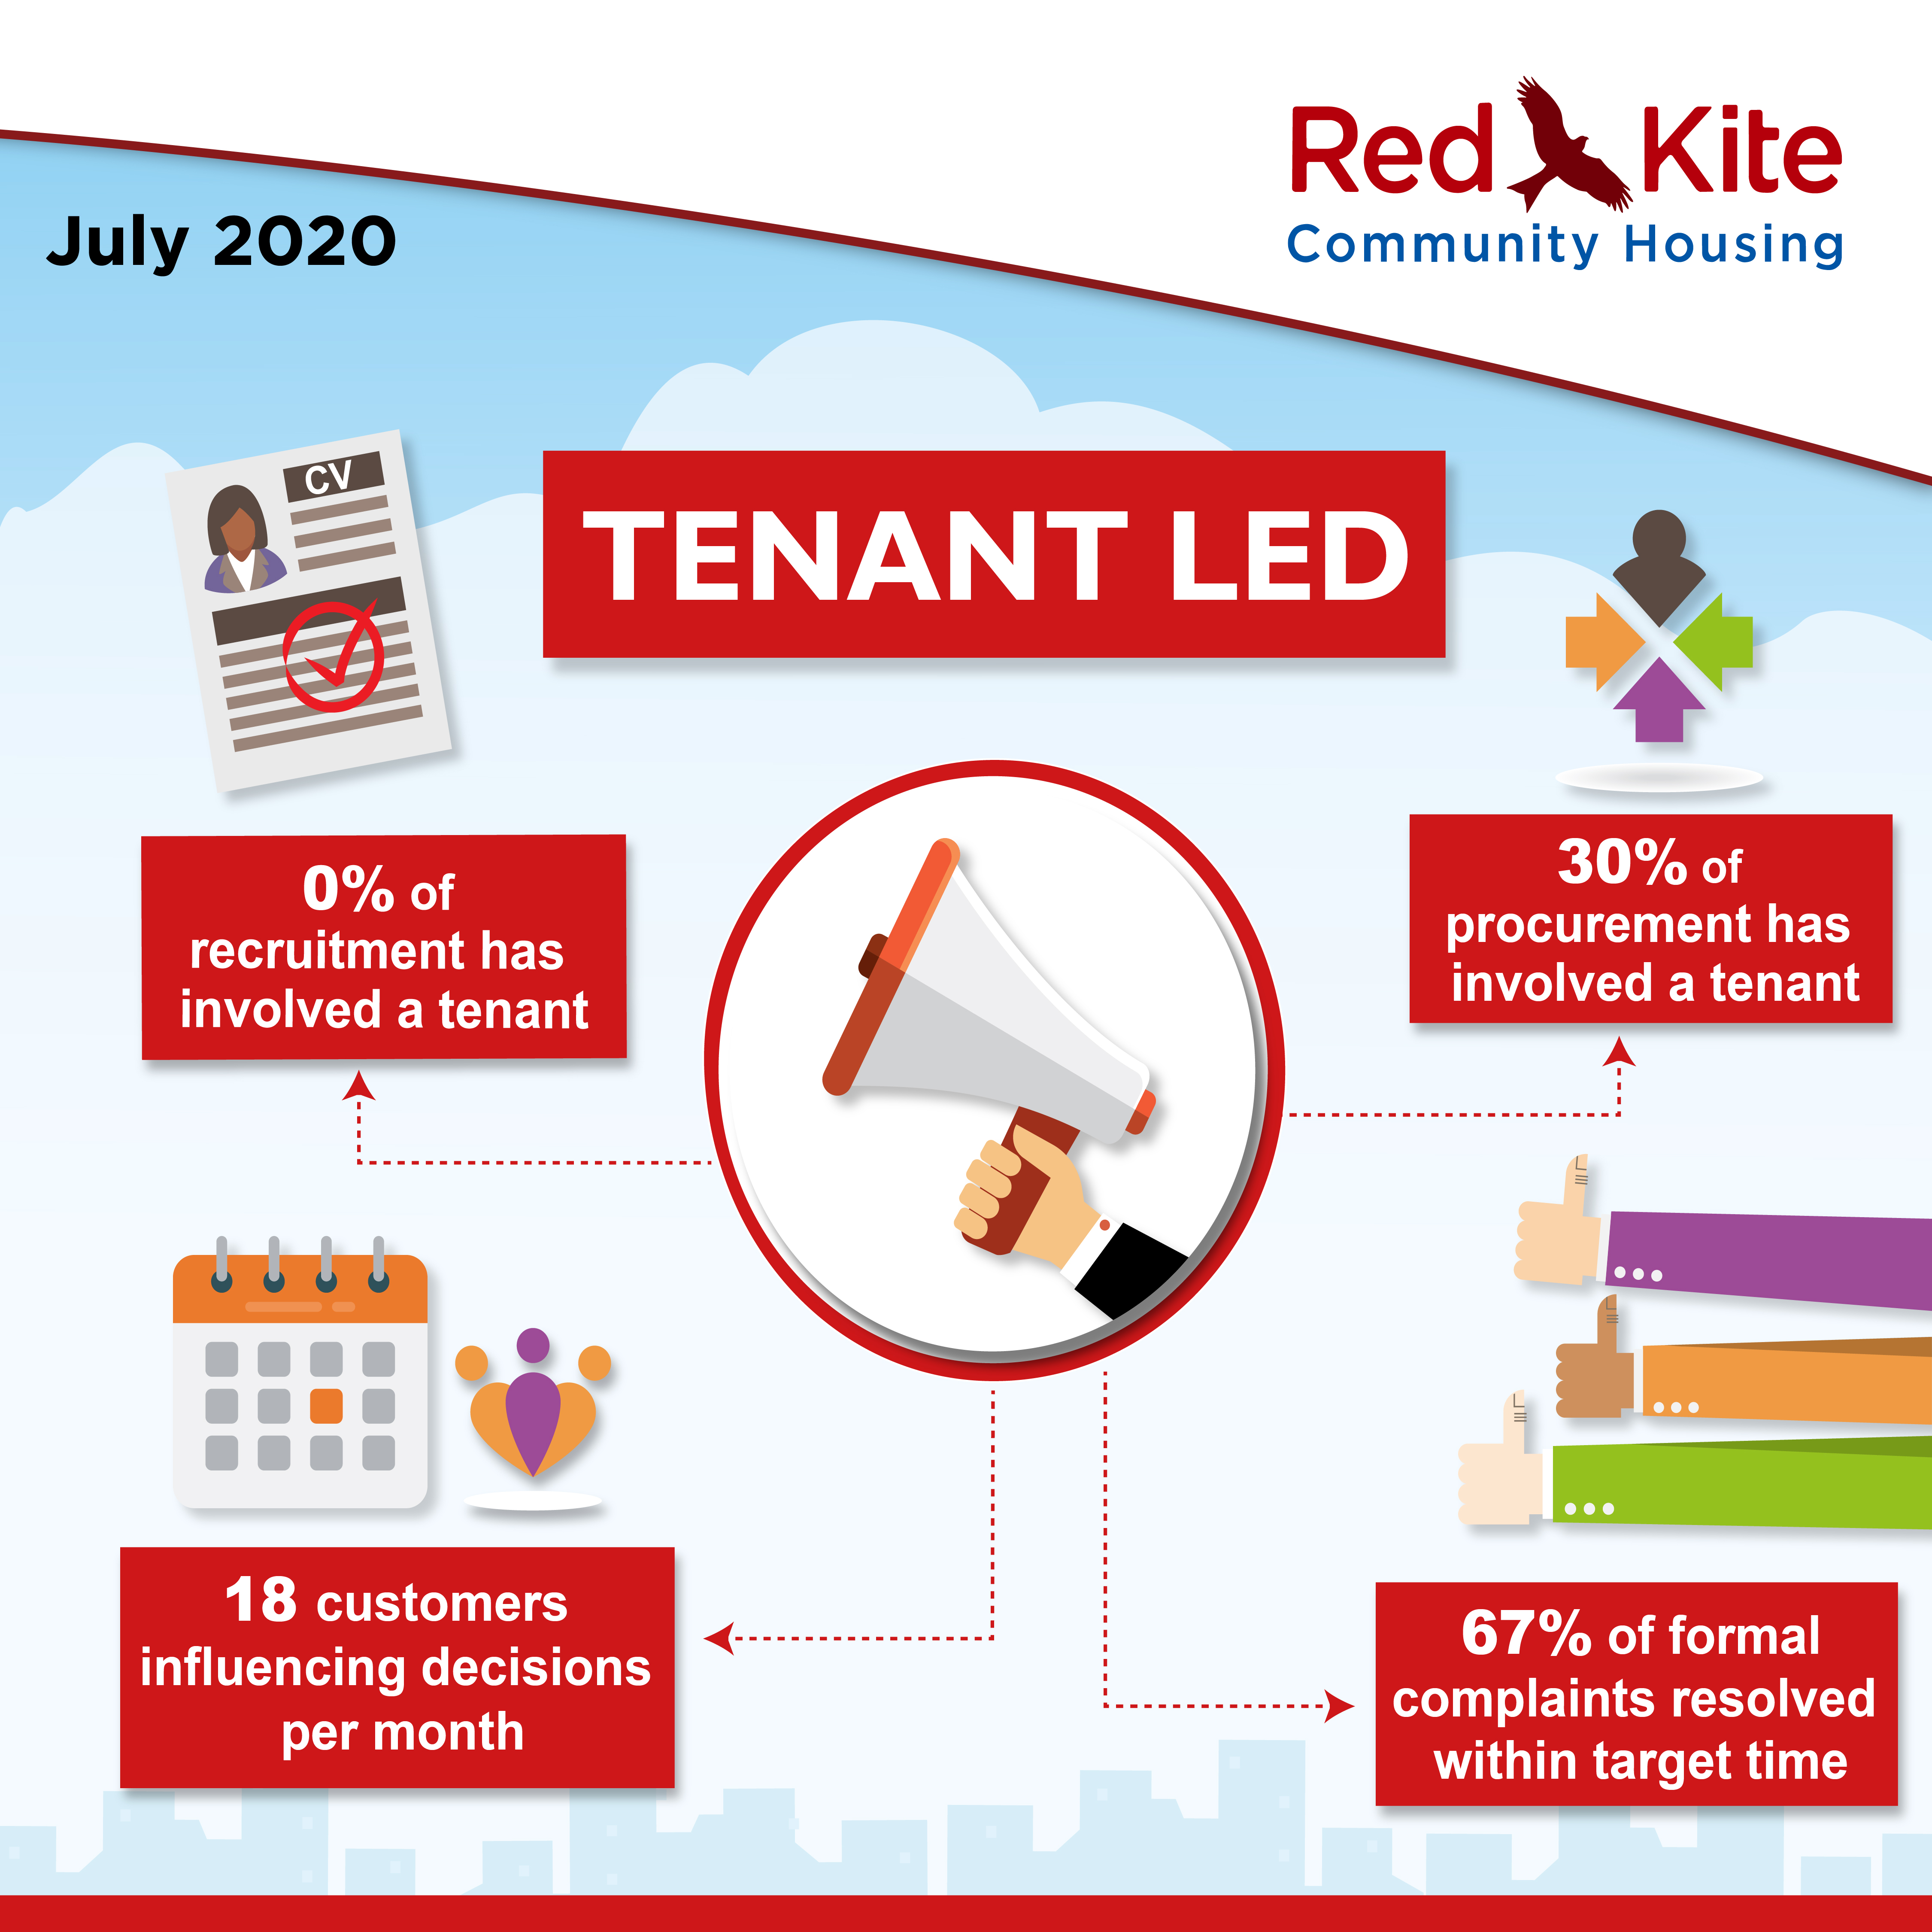 Tenant-Led Performance measures, July 2020 - 0% of recruitment has involved a tenant; 30% of procurement has involved a tenant; 67% of formal complaints resolved within target time; 18 customers influencing decisions per month